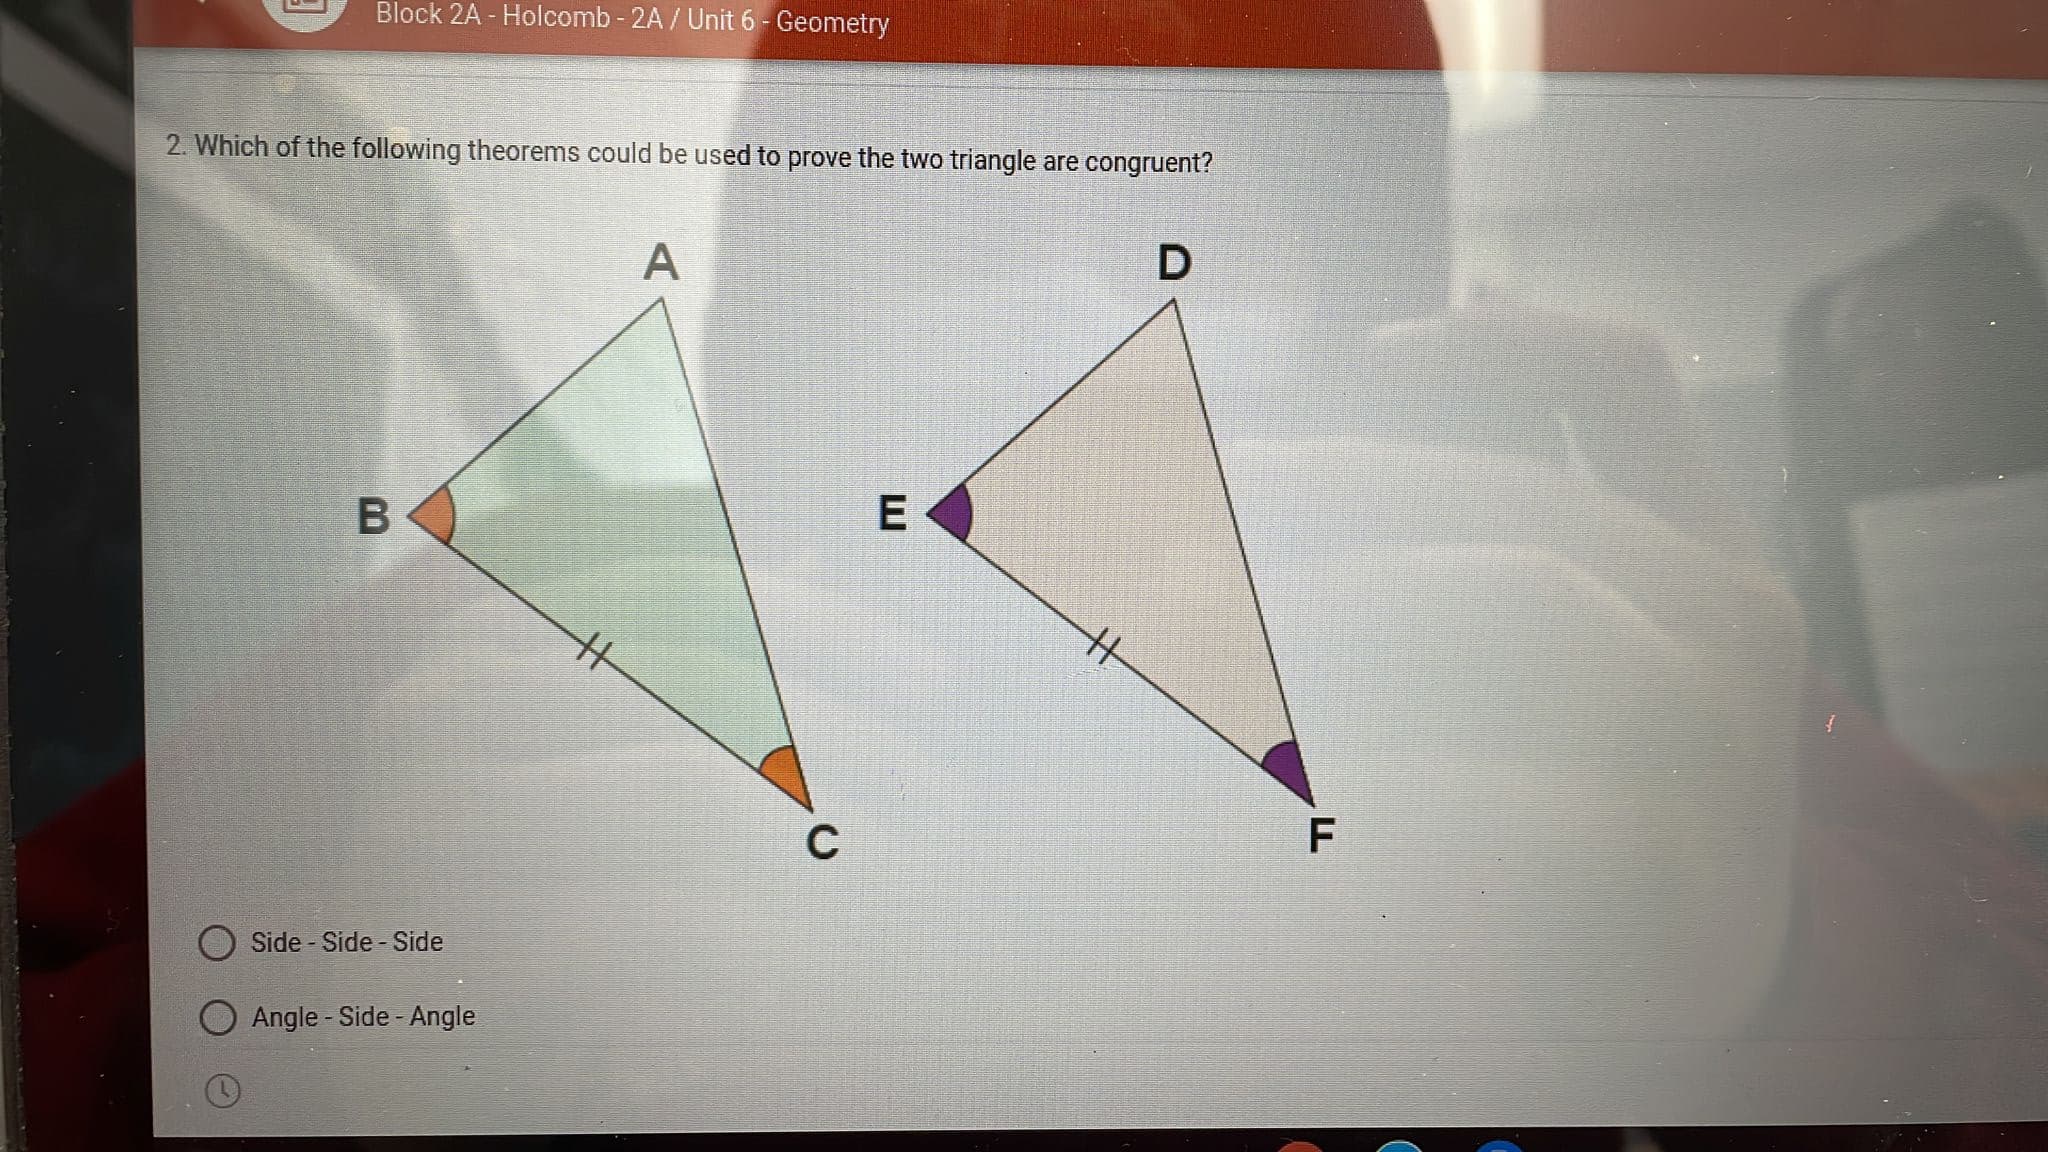 Block 2A - Holcomb - 2A / Unit 6- Geometry
2. Which of the following theorems could be used to prove the two triangle are congruent?
А
C
Side - Side - Side
Angle - Side - Angle
